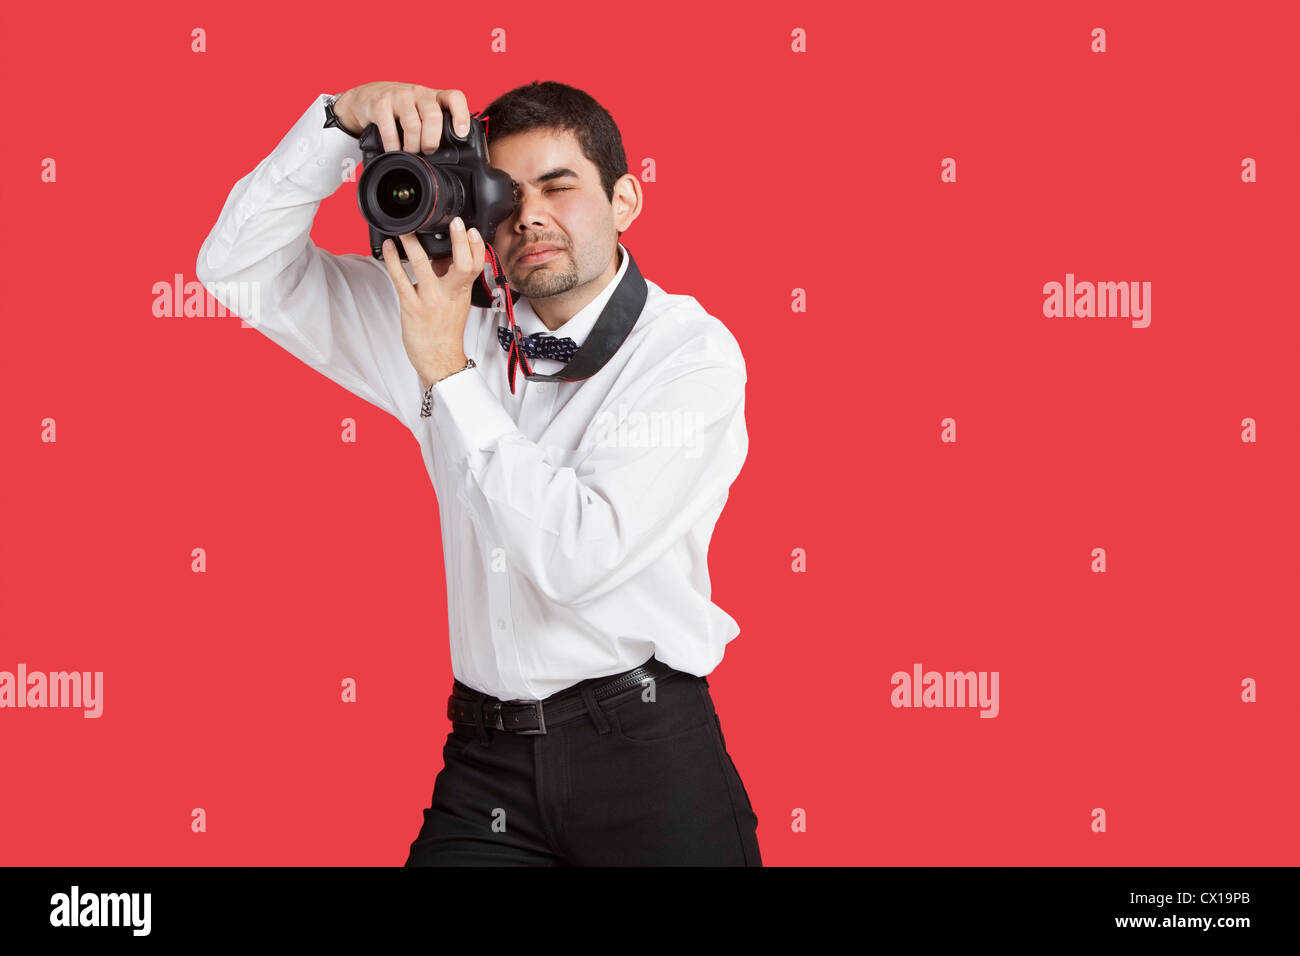 Mixed race man taking picture with digital camera over red background Stock Photo